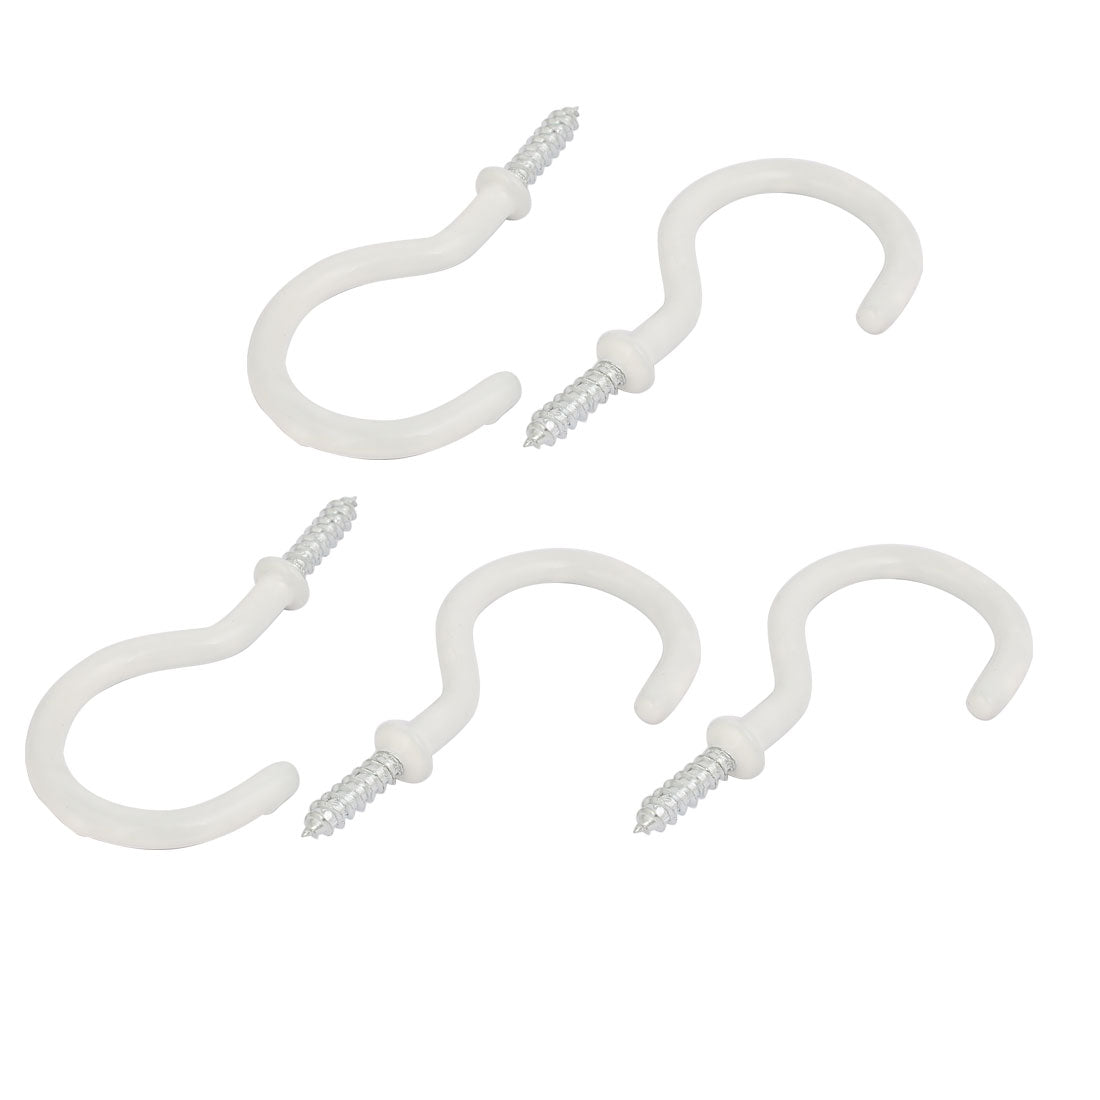 uxcell Uxcell 2 Inch Plastic Coated Screw-in Open Cup Ceiling Hooks Hangers White 5pcs